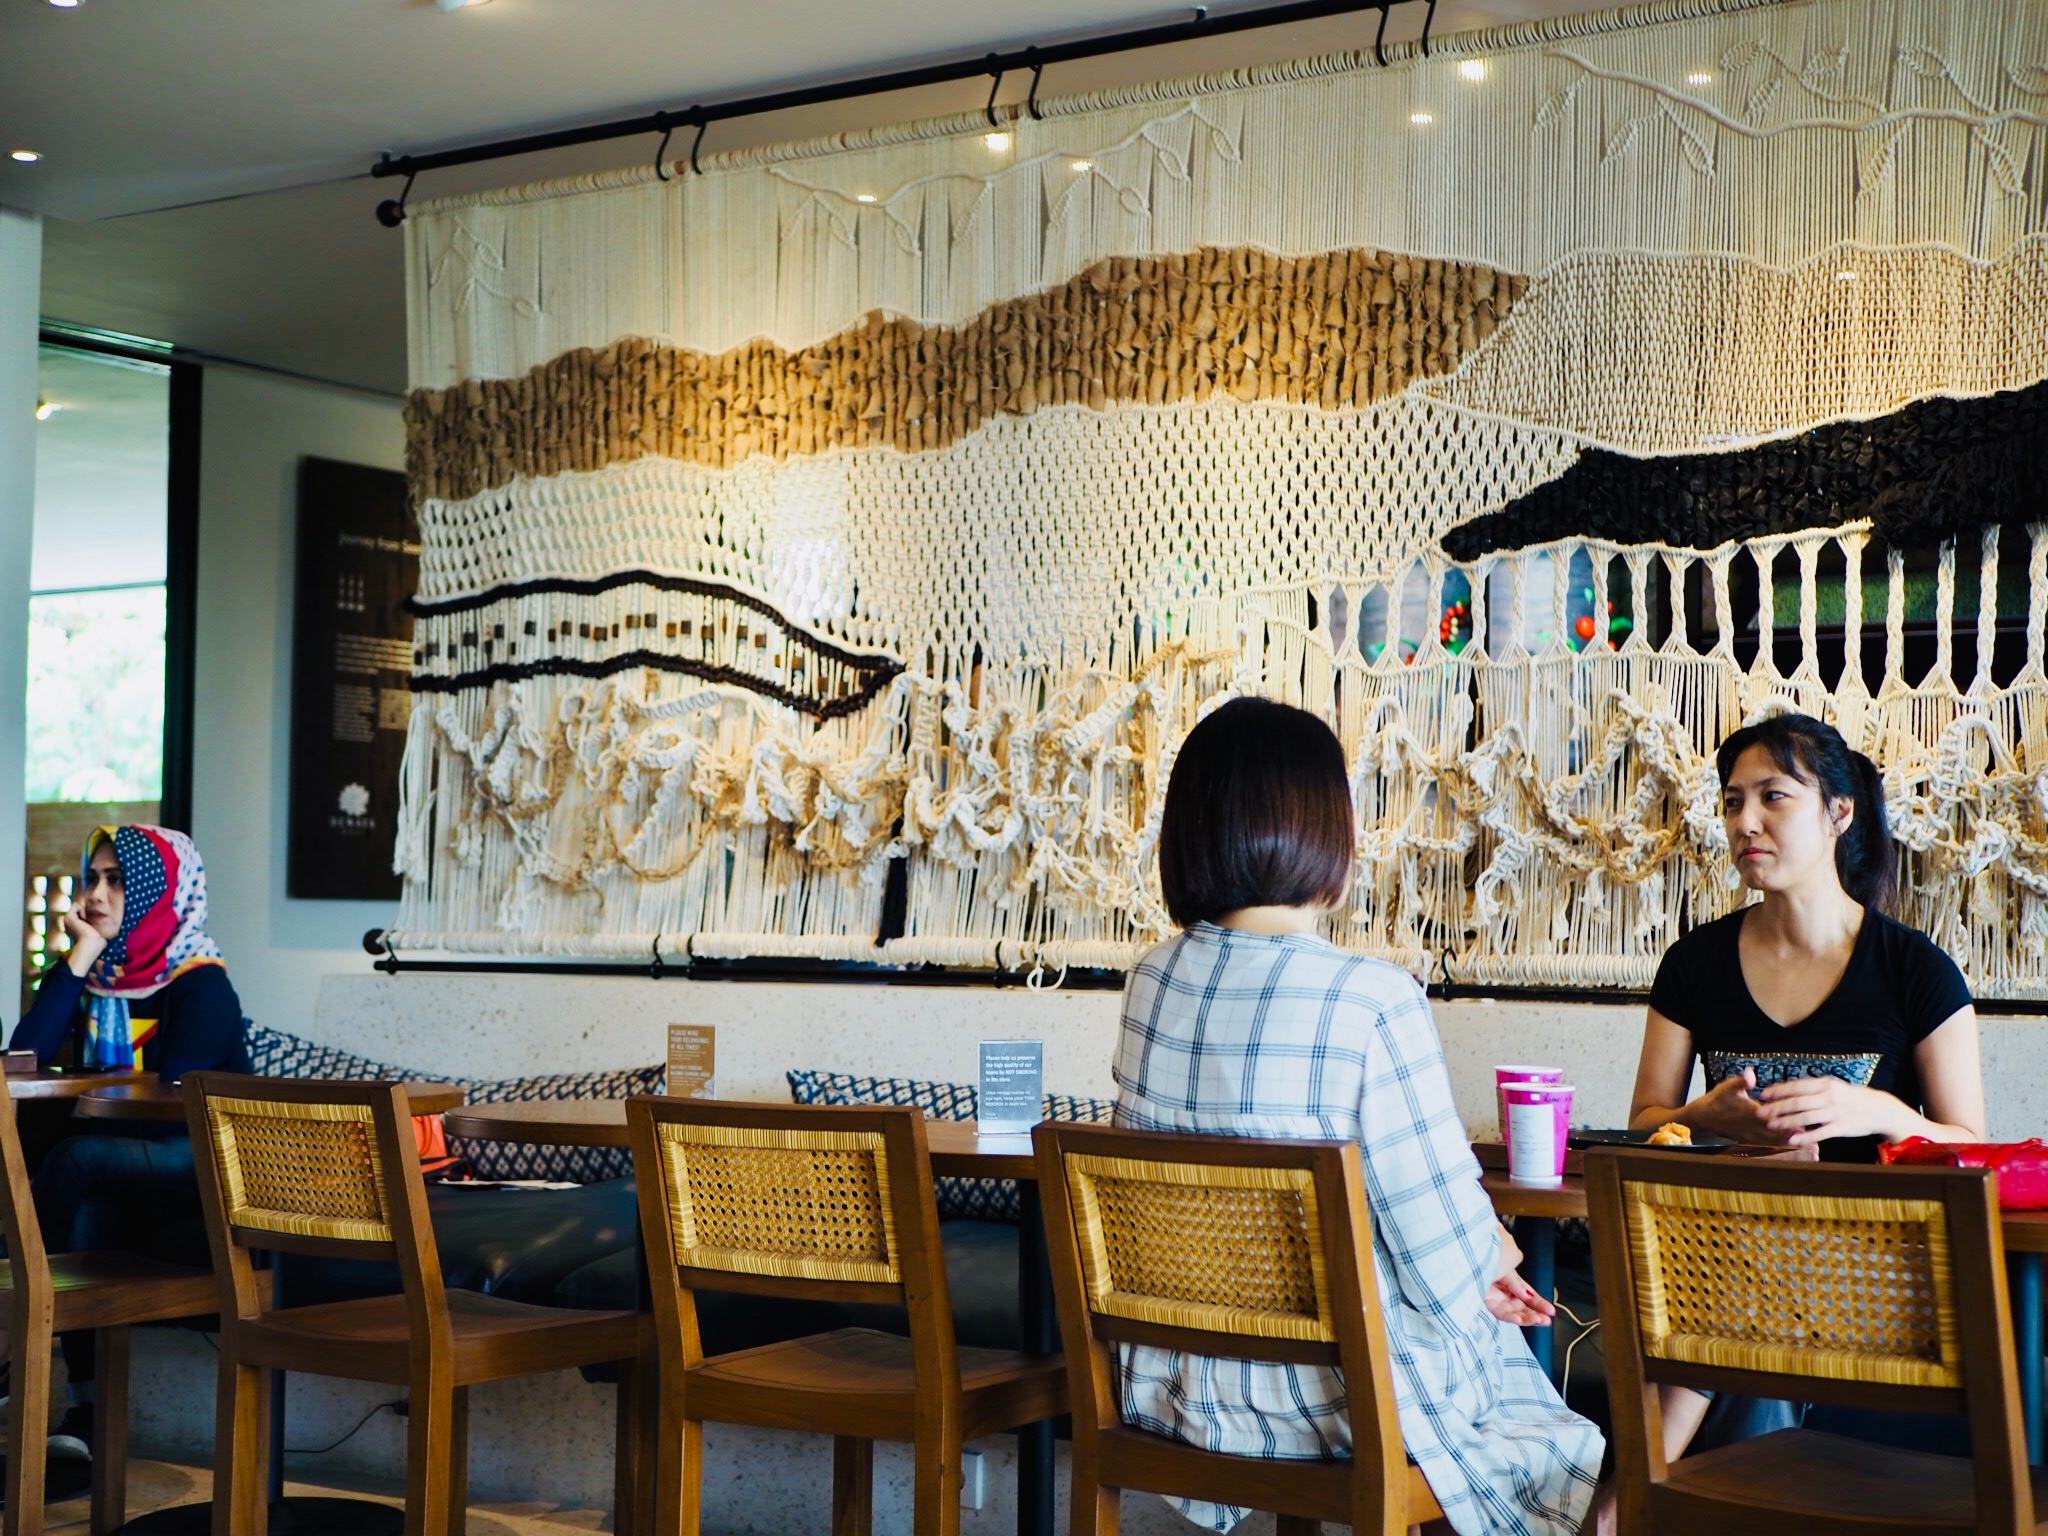 Dewata's macrame wall hanging, dyed with natural coffee. Photo: Coconuts Bali